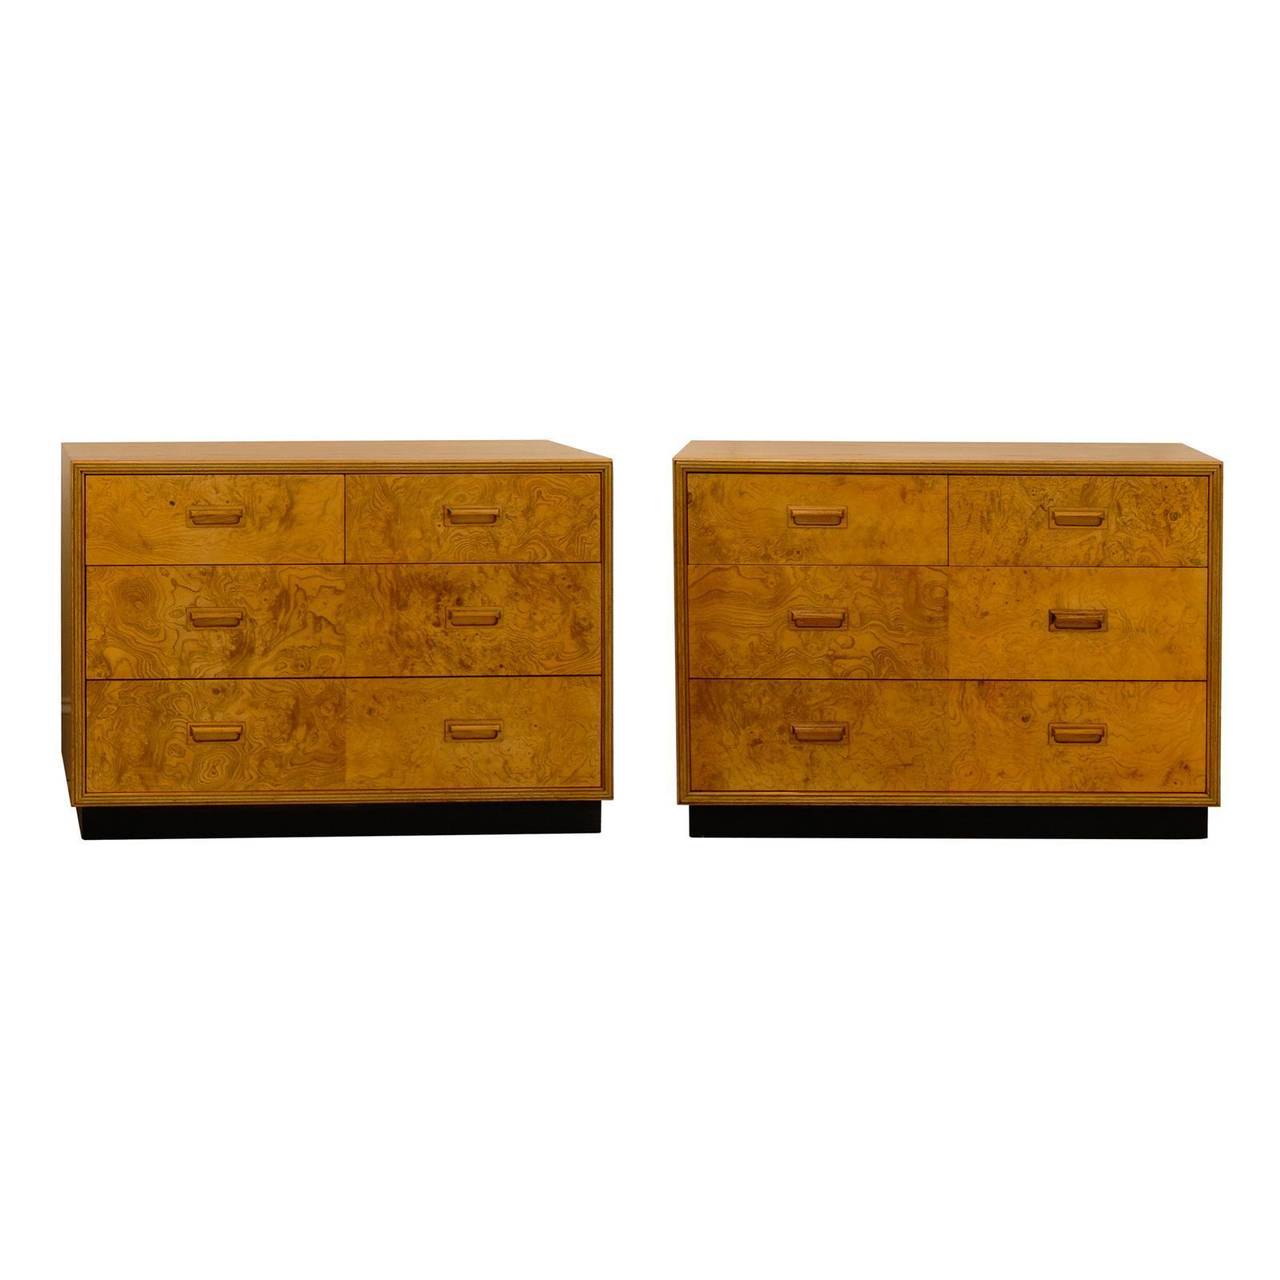 Stunning Restored Pair of Olivewood Chests by Henredon, circa 1980